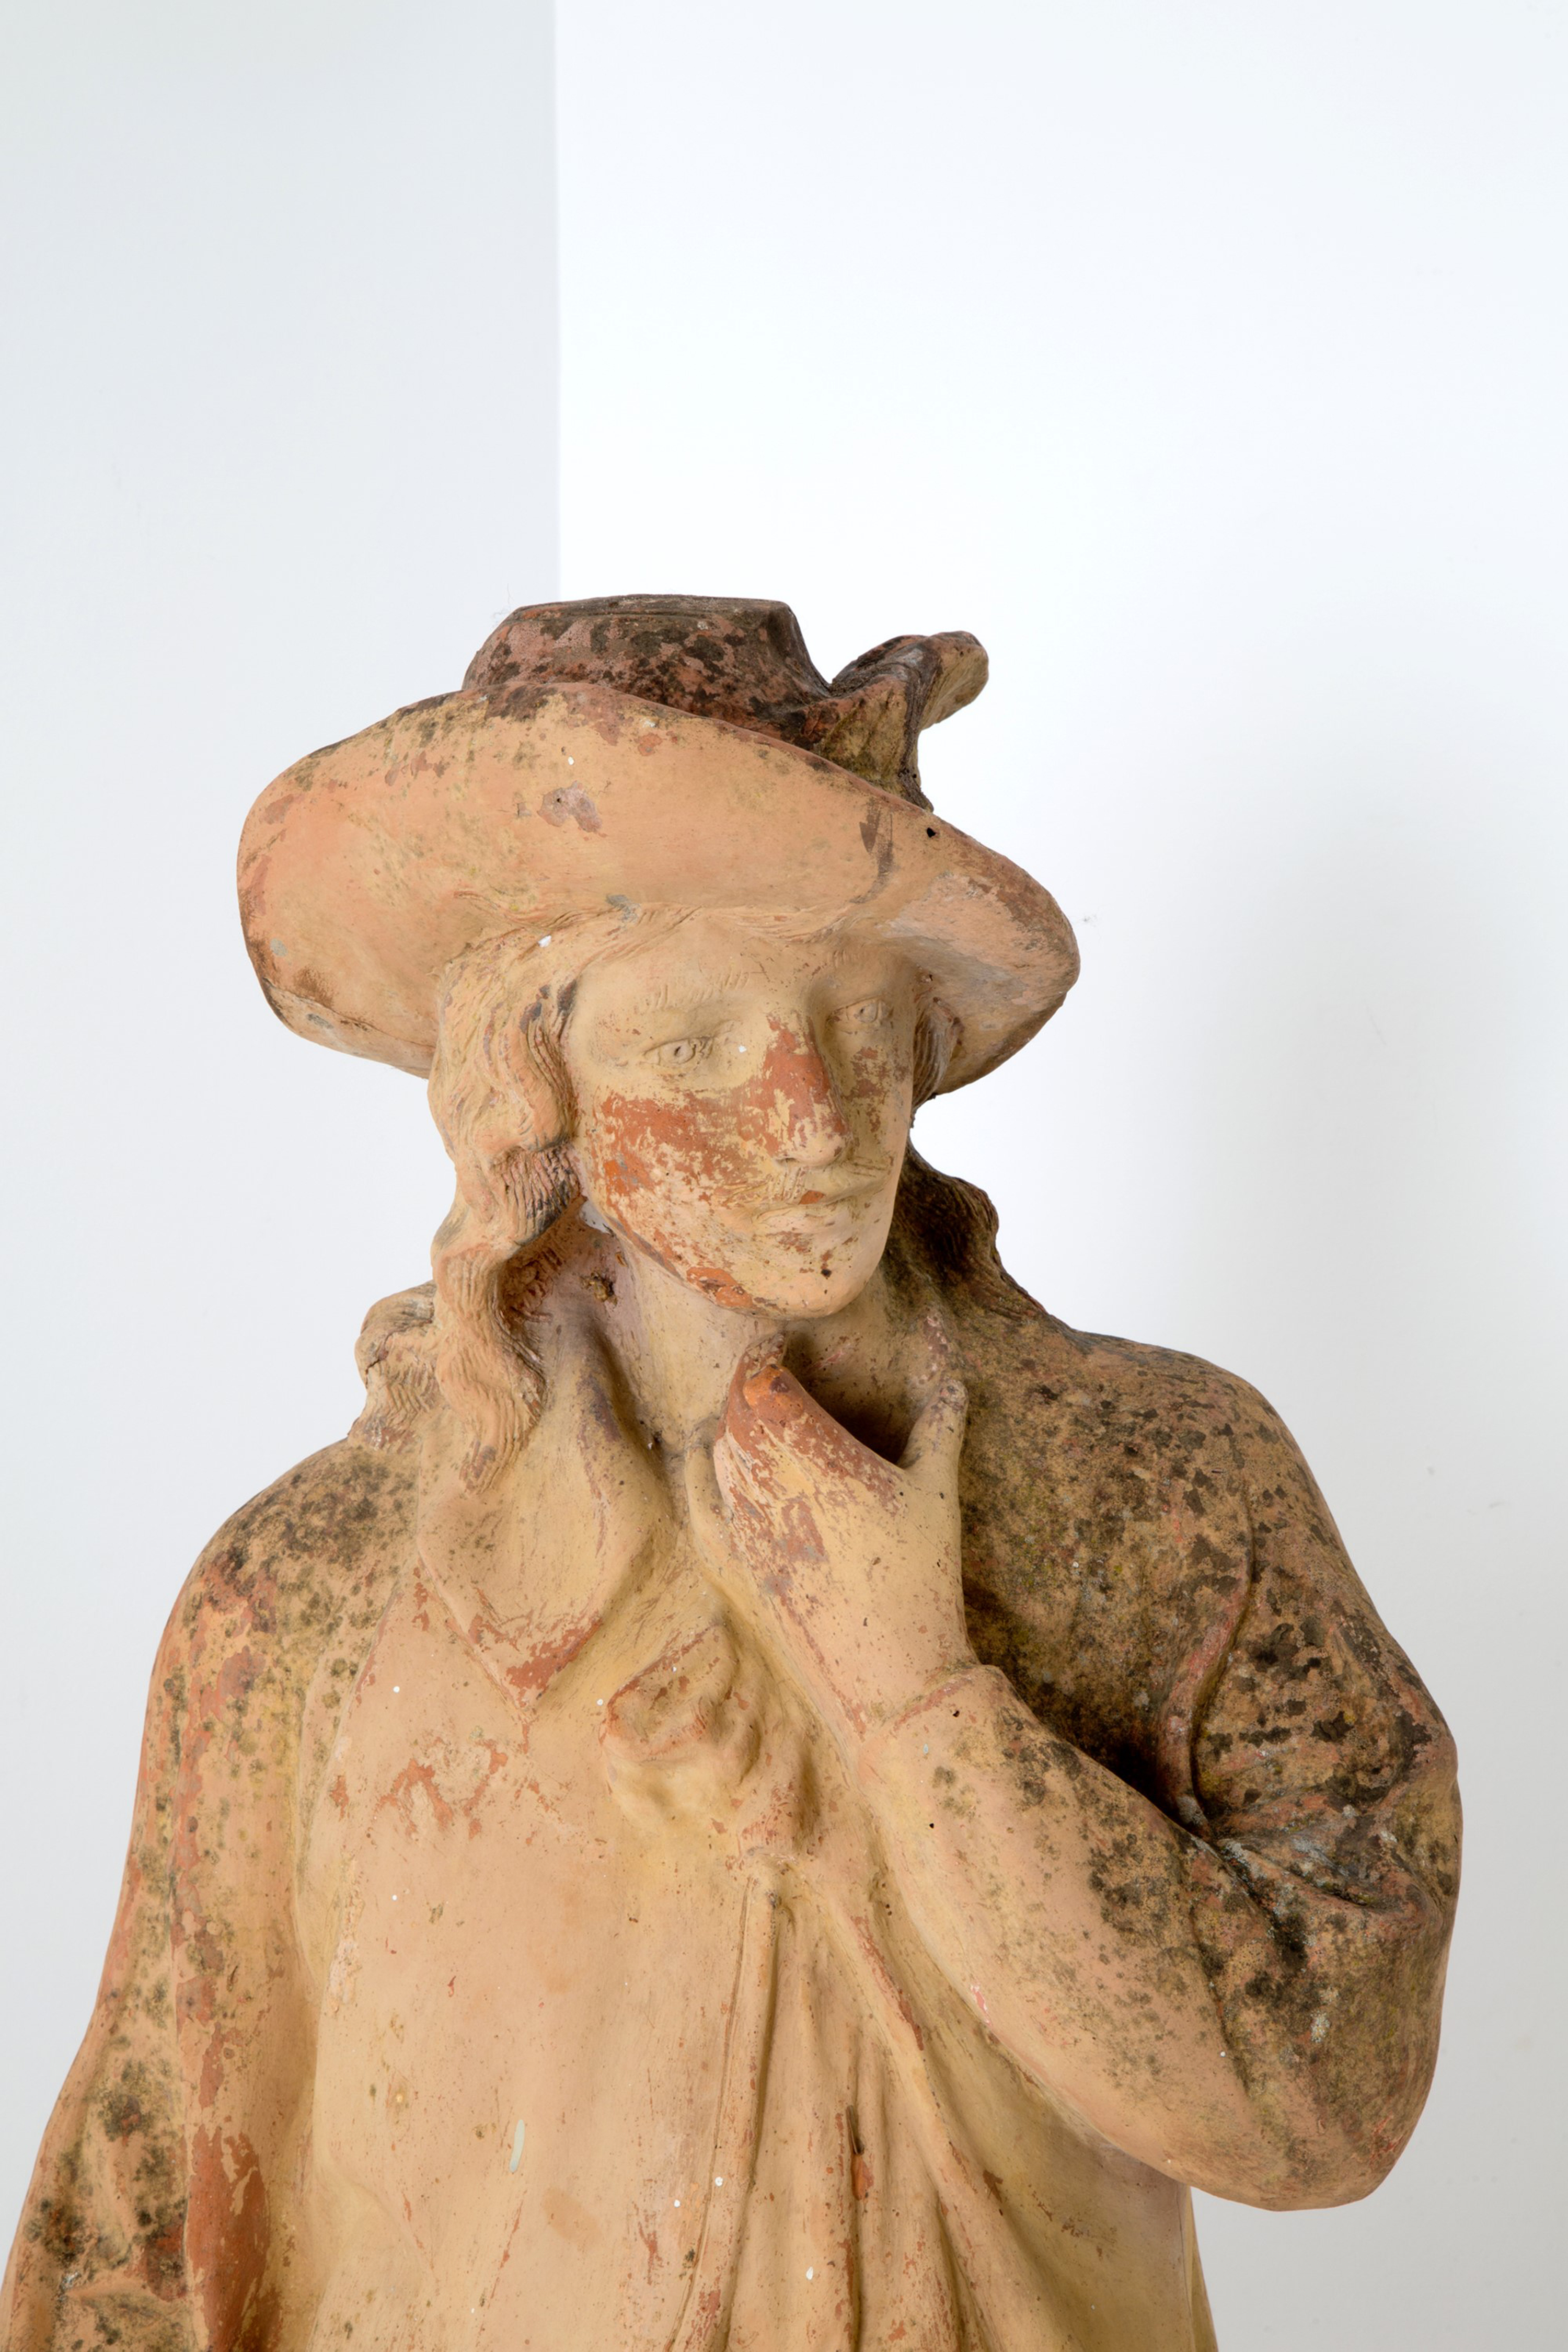 Terracotta sculpture "YOUNG NOBLE" - Image 2 of 4